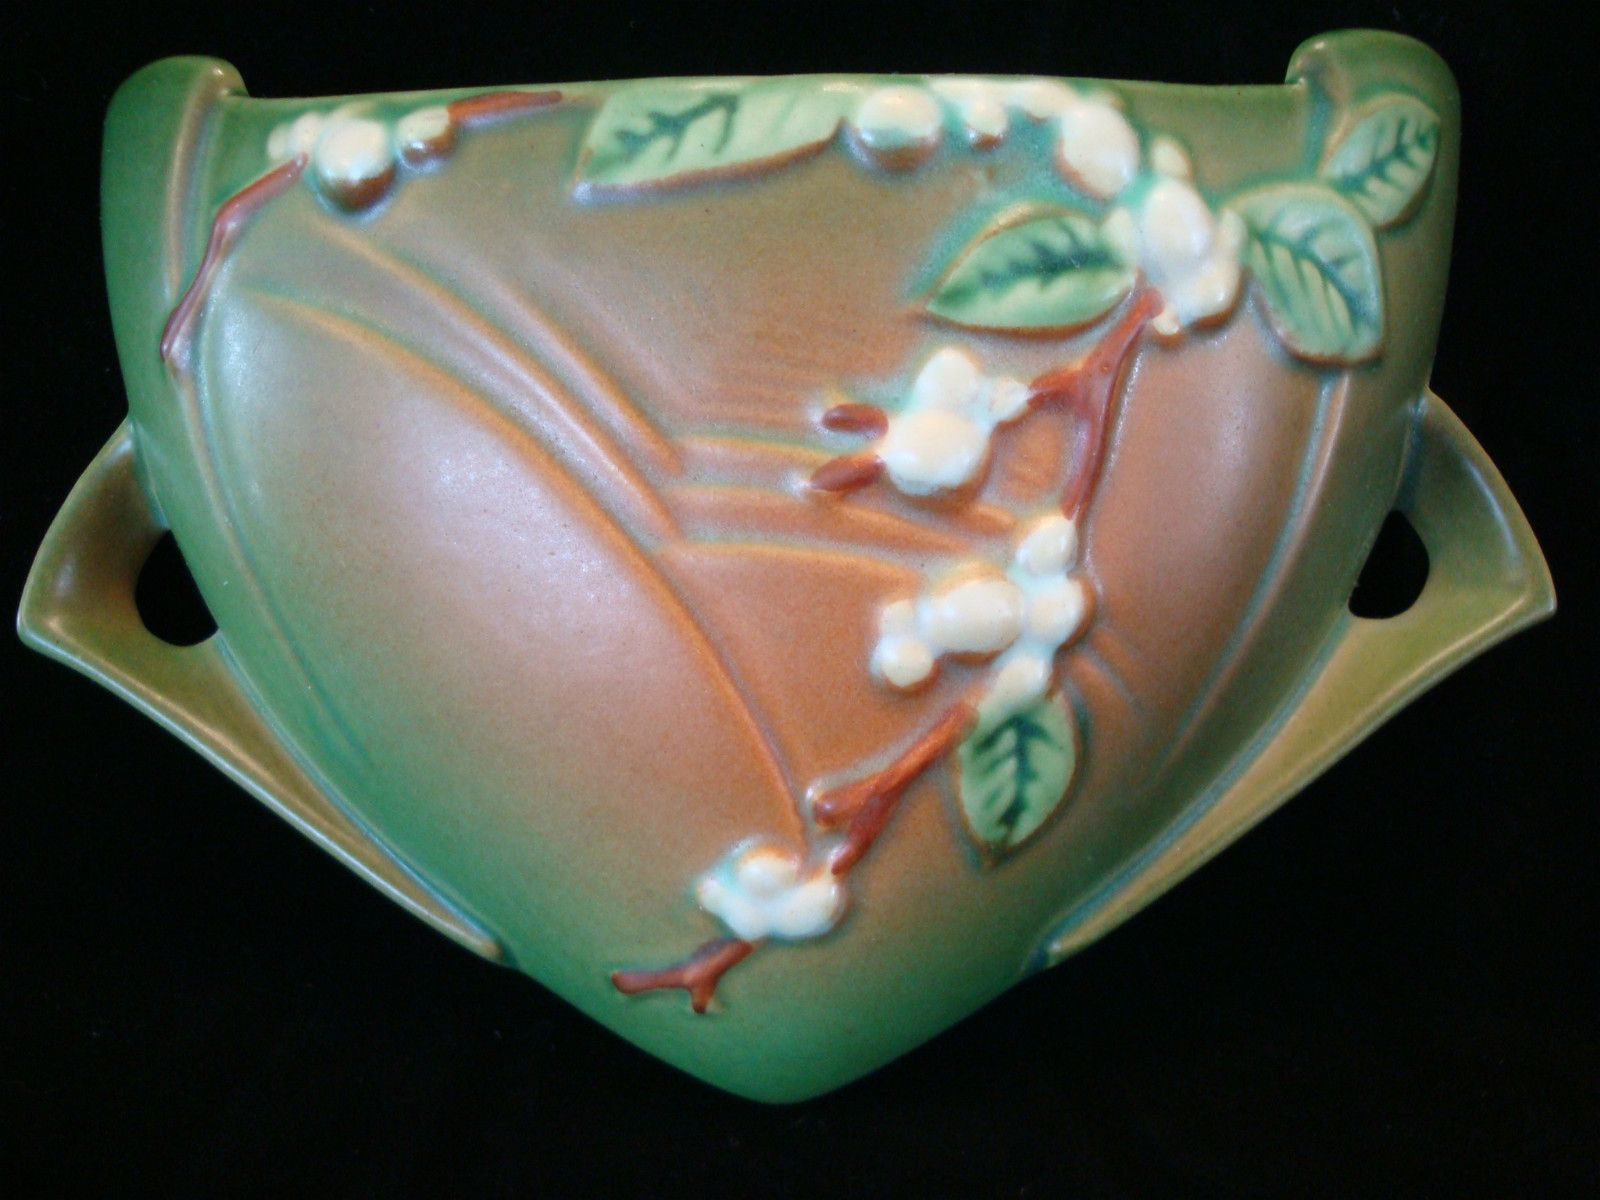 17 Unique Roseville Snowberry Vase 2022 free download roseville snowberry vase of vintage 1946 roseville snowberry wall pocket vase handled green with vintage 1946 roseville snowberry wall pocket vase handled green iwp 8